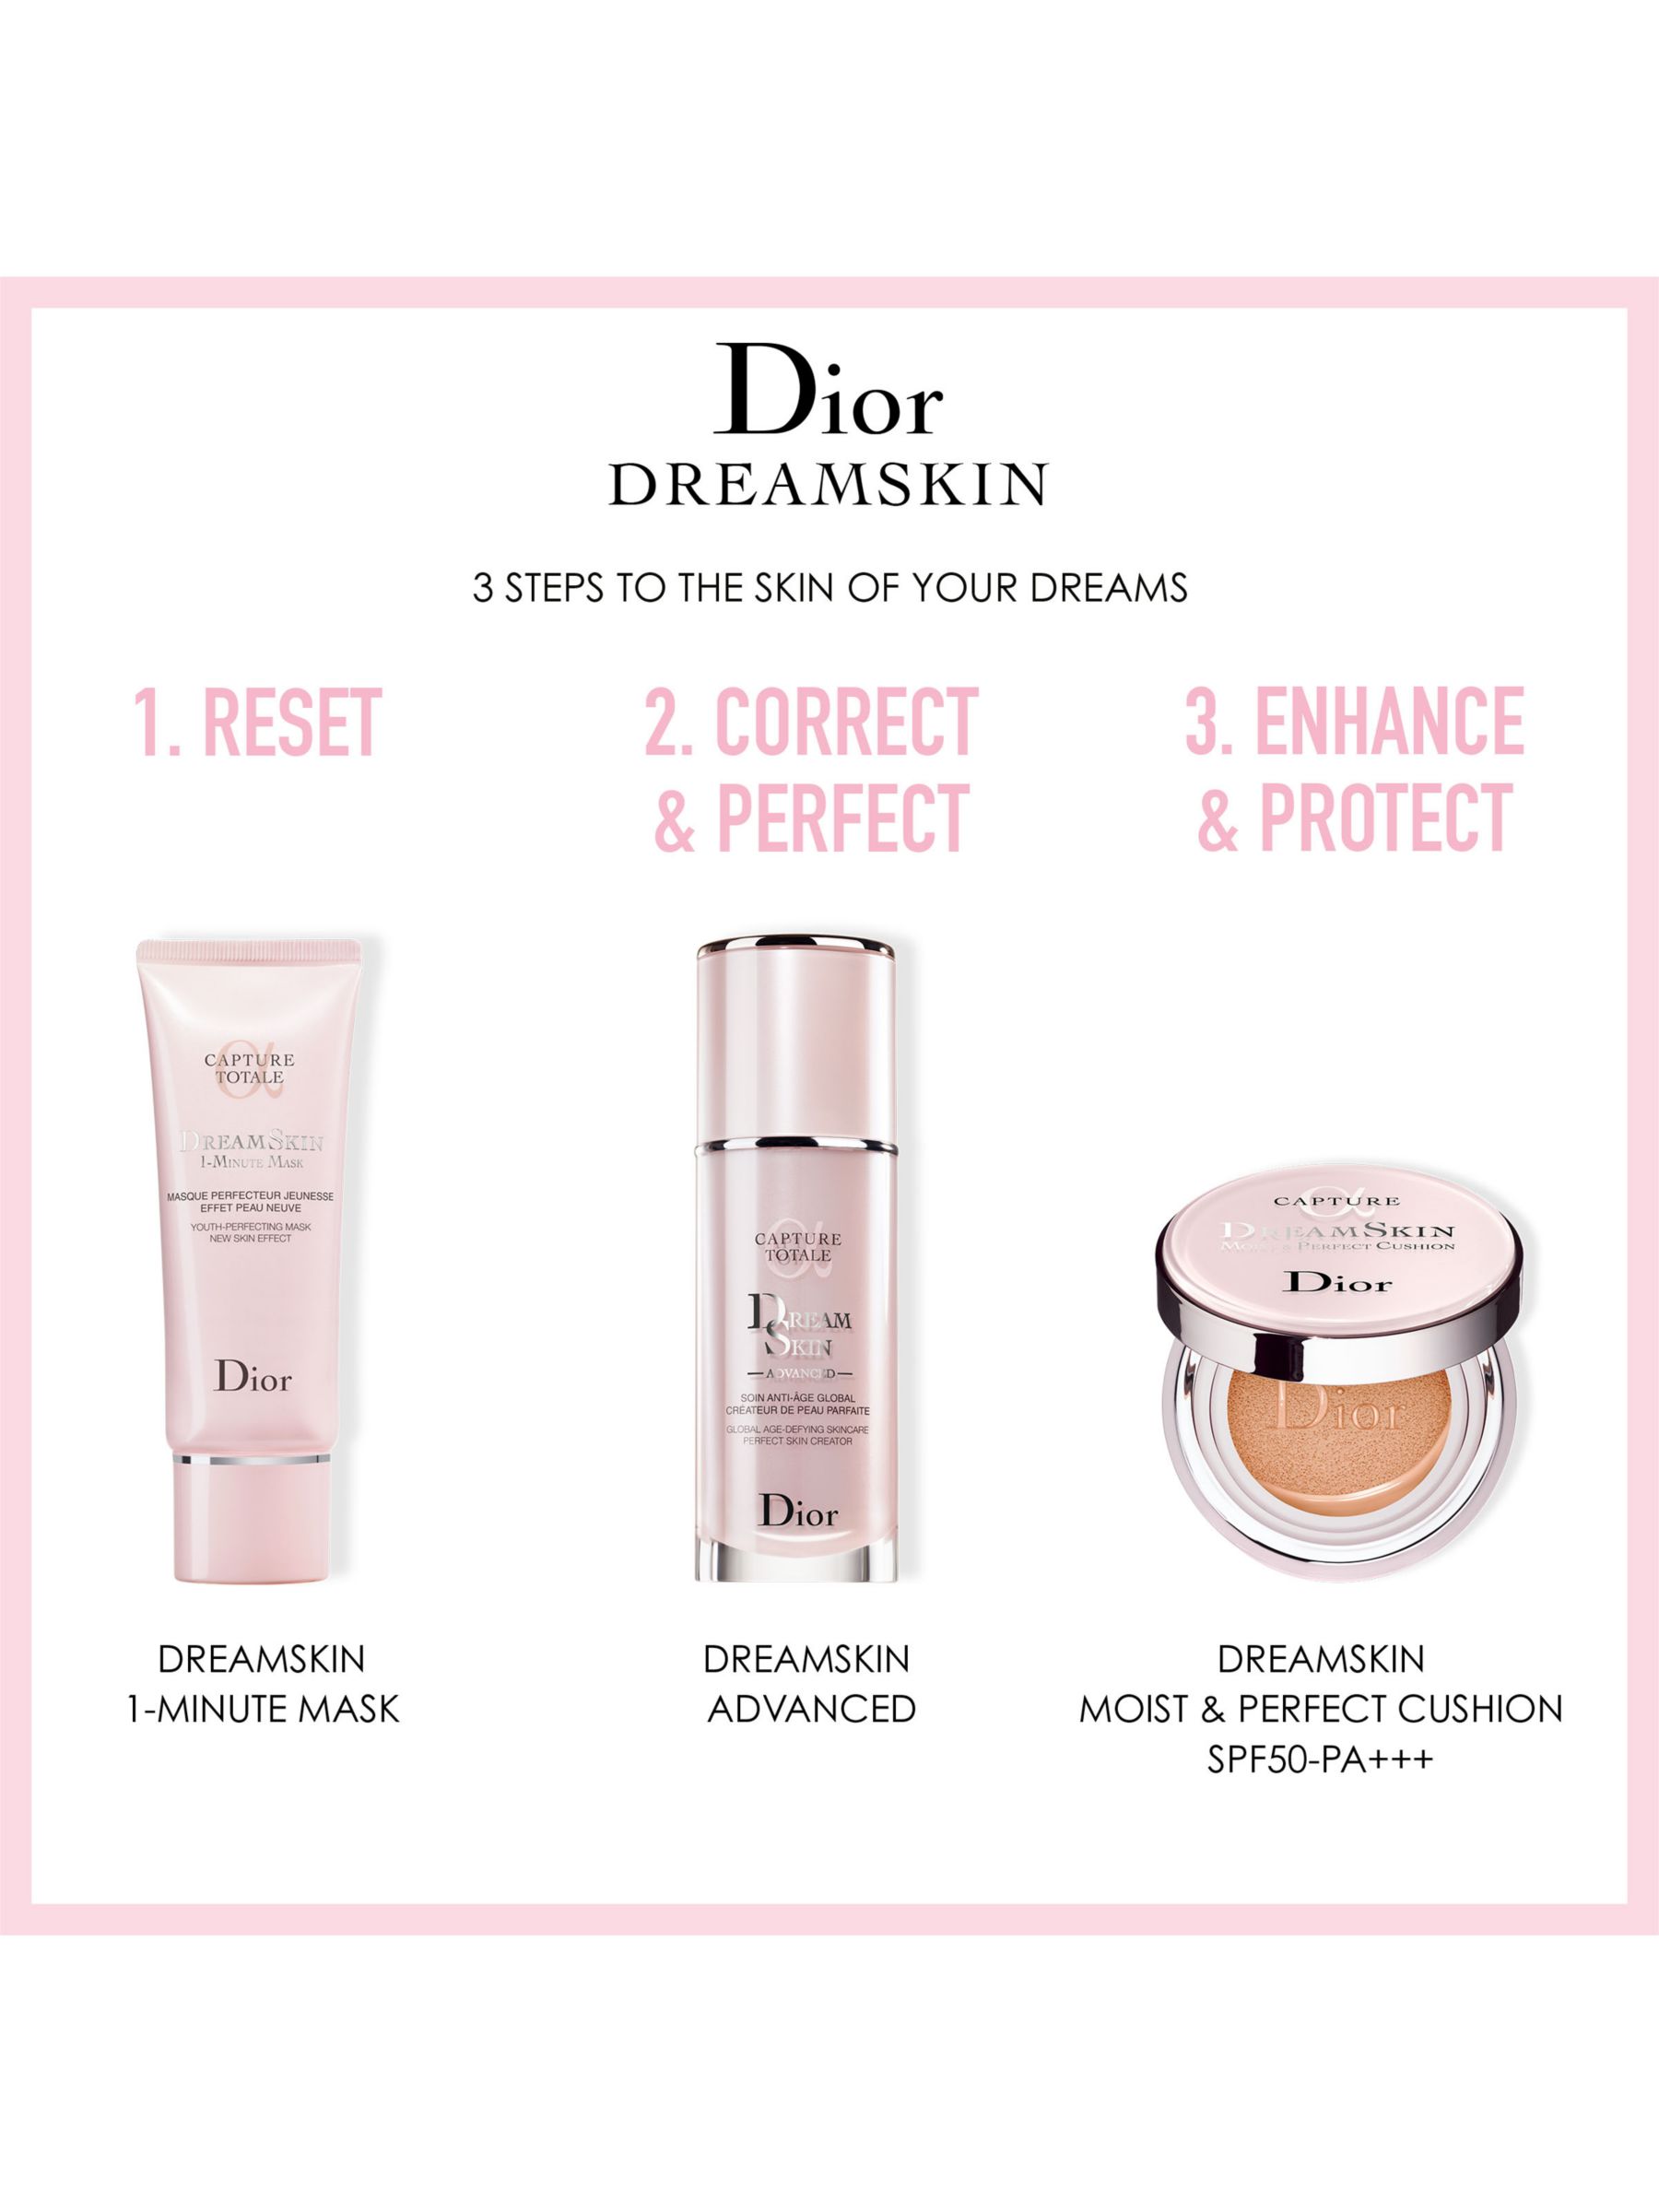 dior capture totale dreamskin advanced review